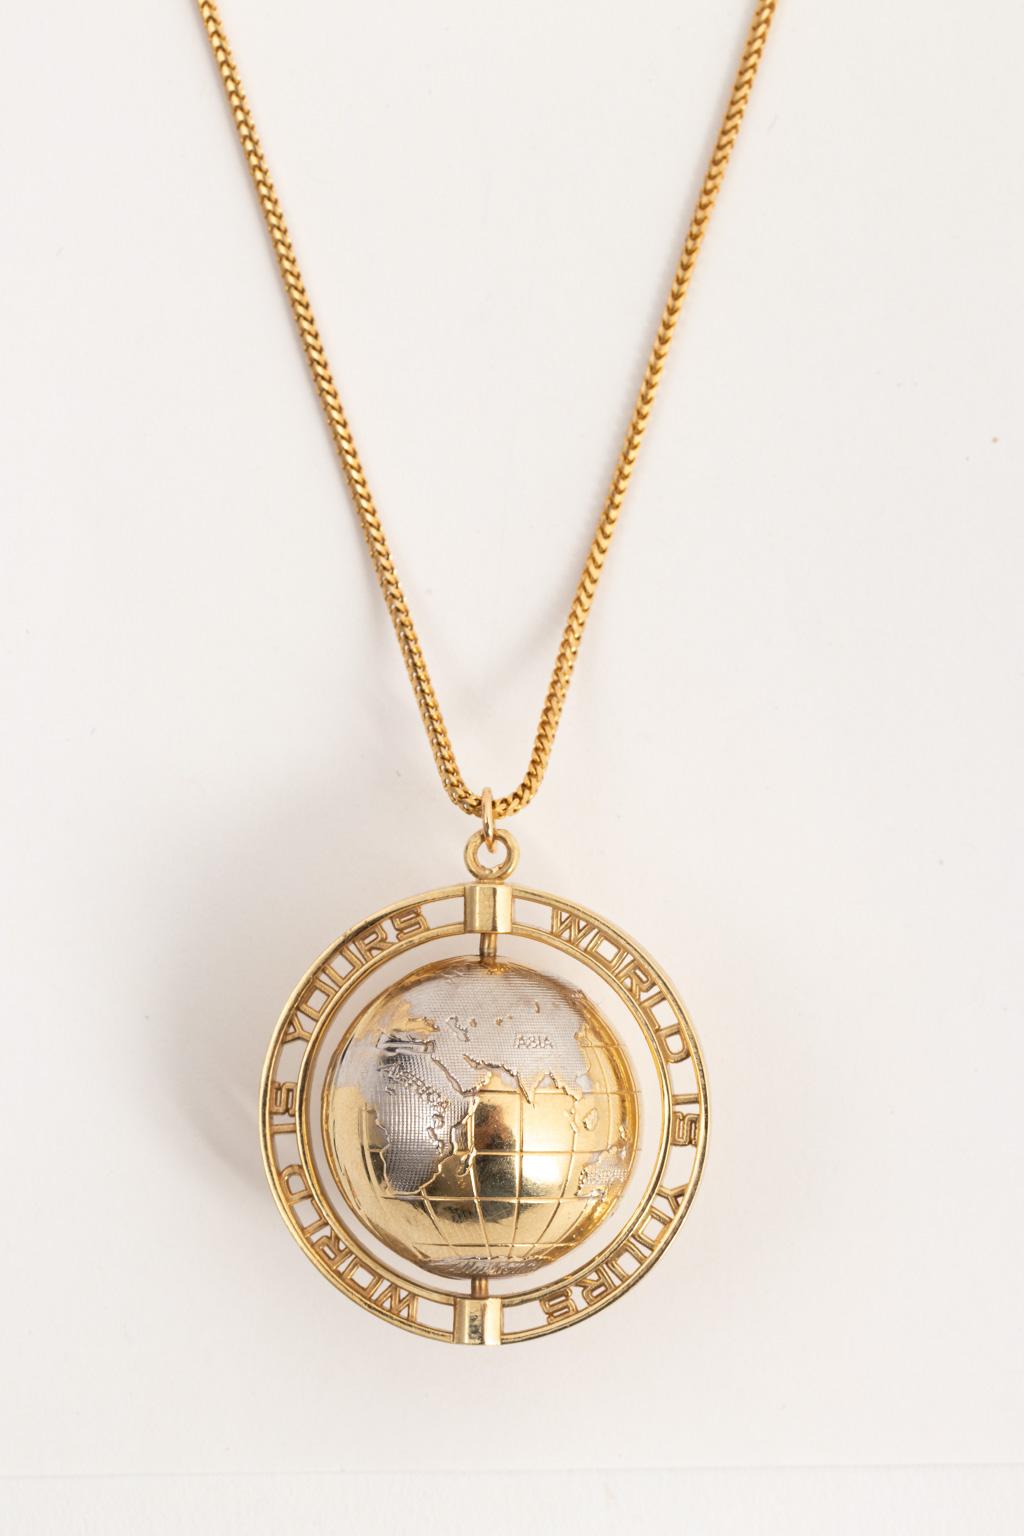 Circa 1950-1960s Mid-Century Modern style 14 karat yellow and white gold globe charm on a 14 karat yellow gold 24.00 Inch herringbone design chain. The globe charm swivels in between an open circular support for the charm and also serves as a design